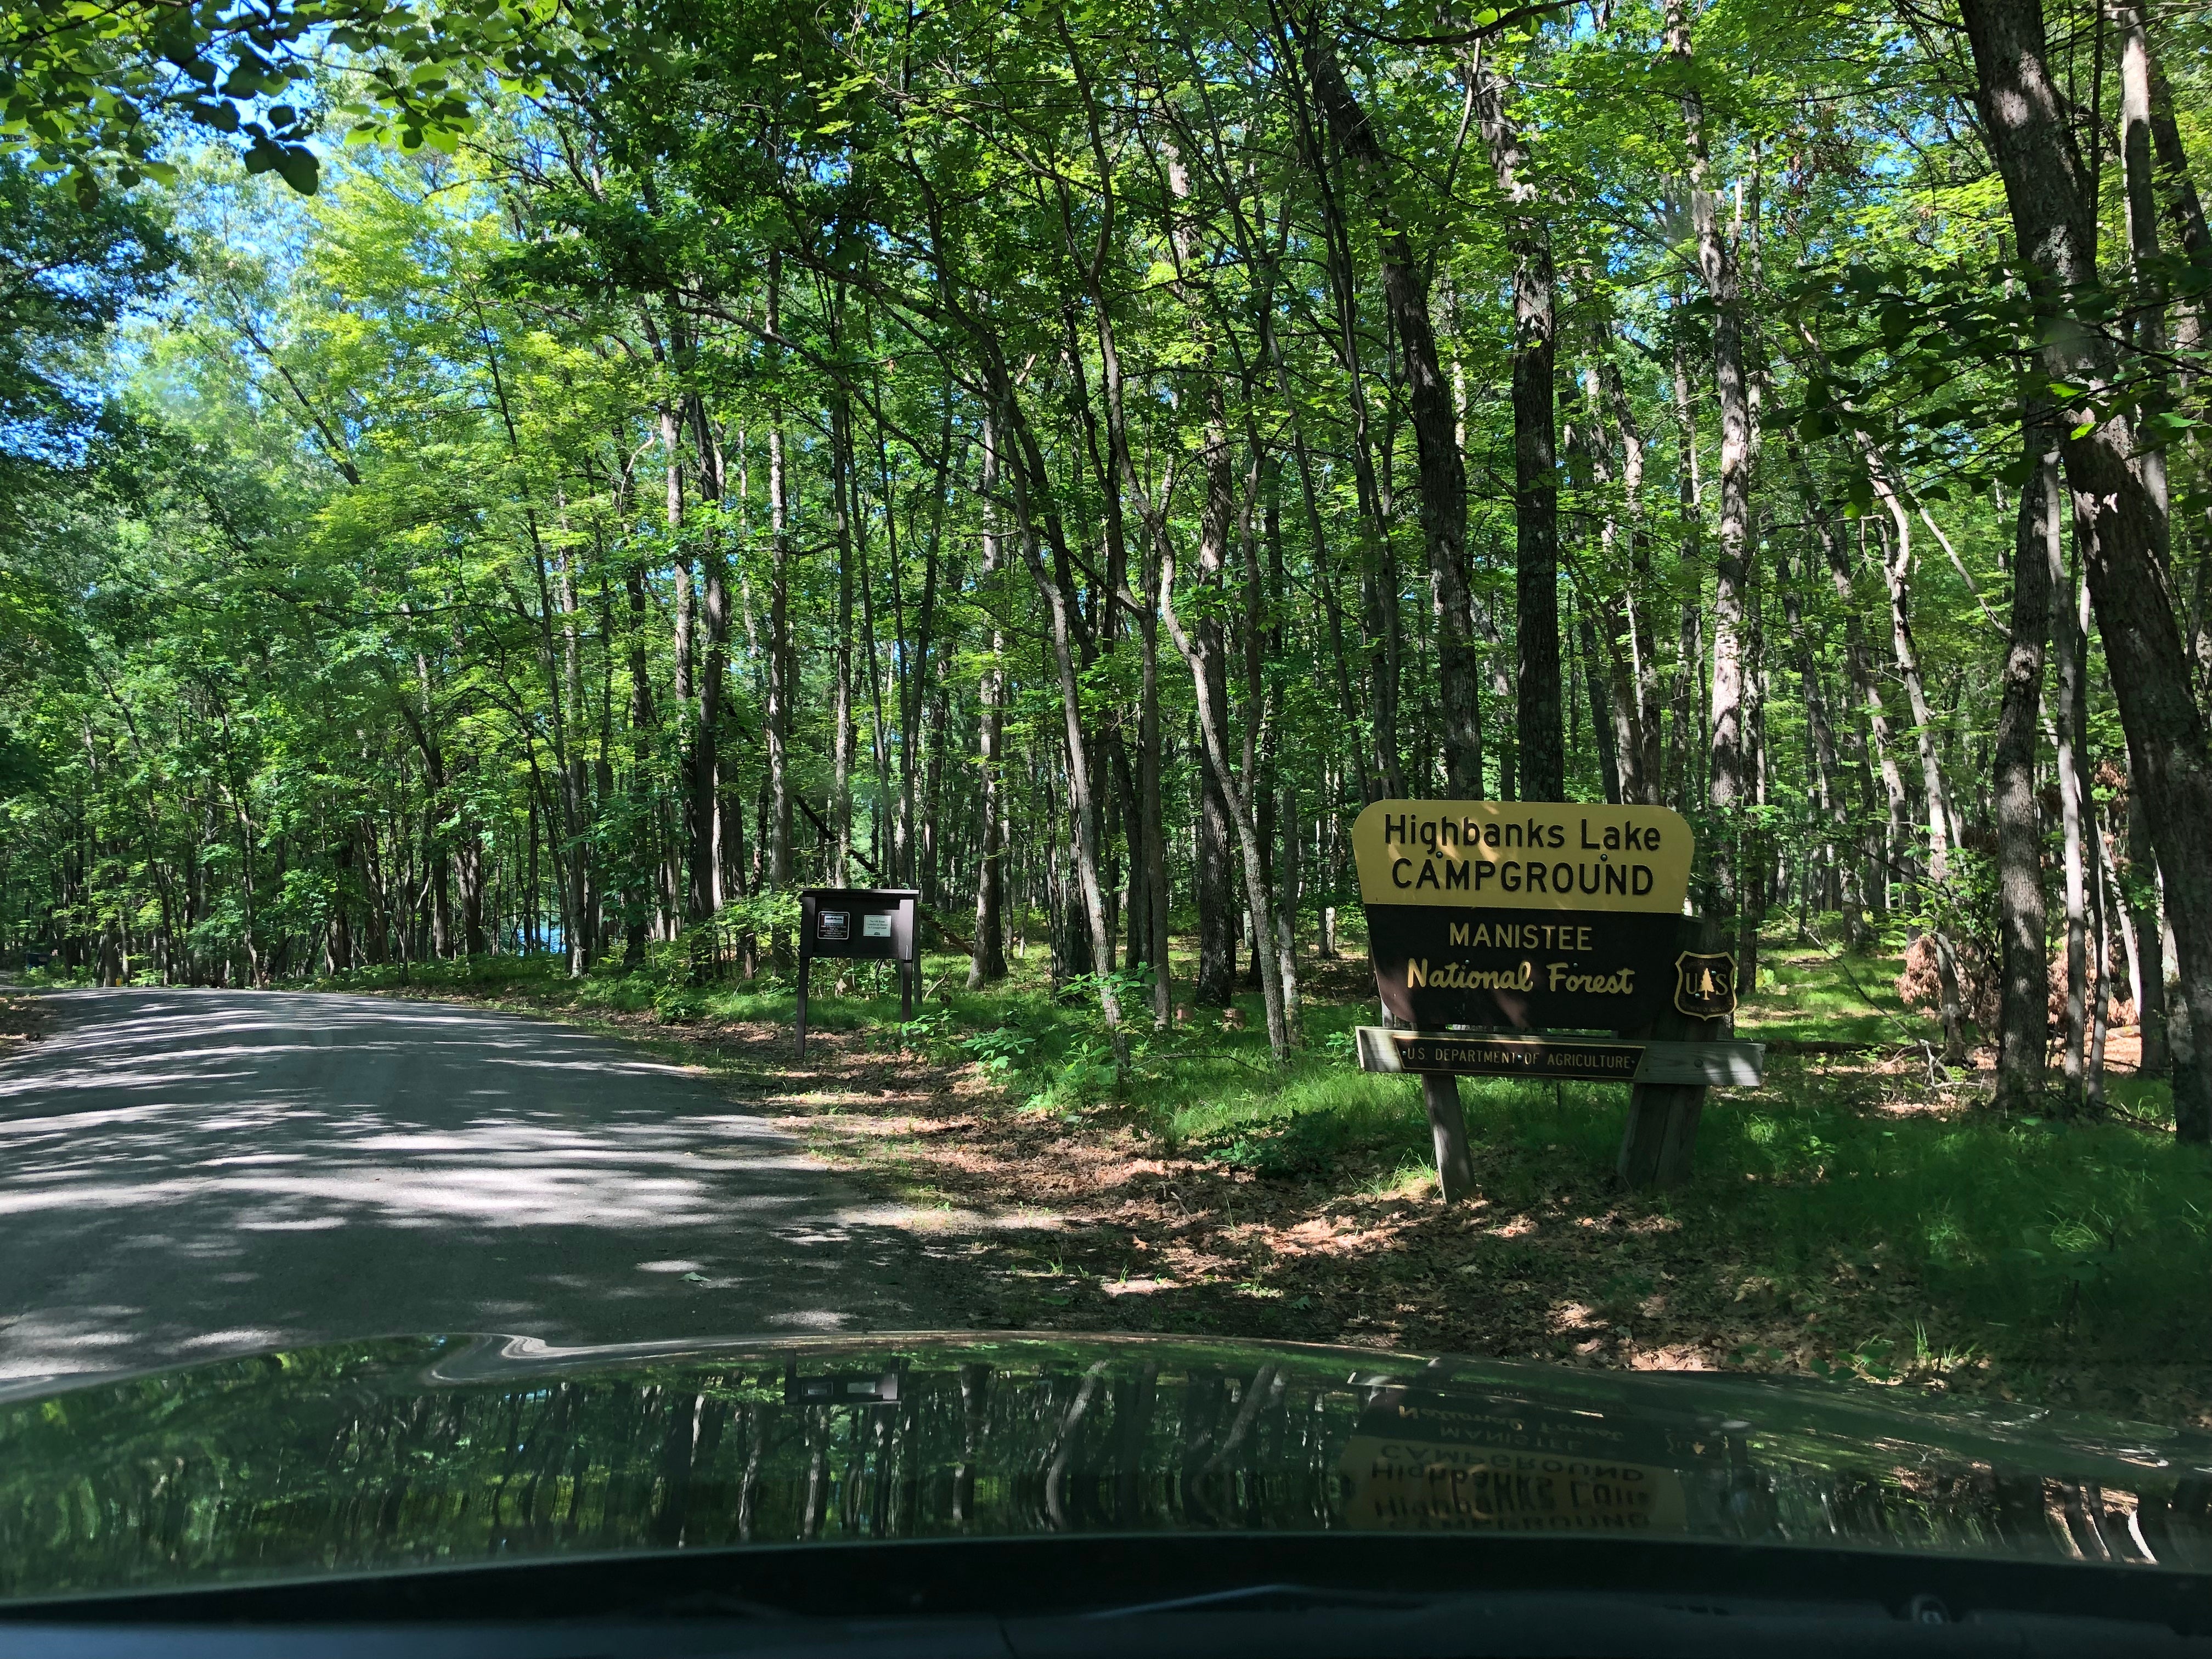 Camper submitted image from Highbank Lake Campground - 4